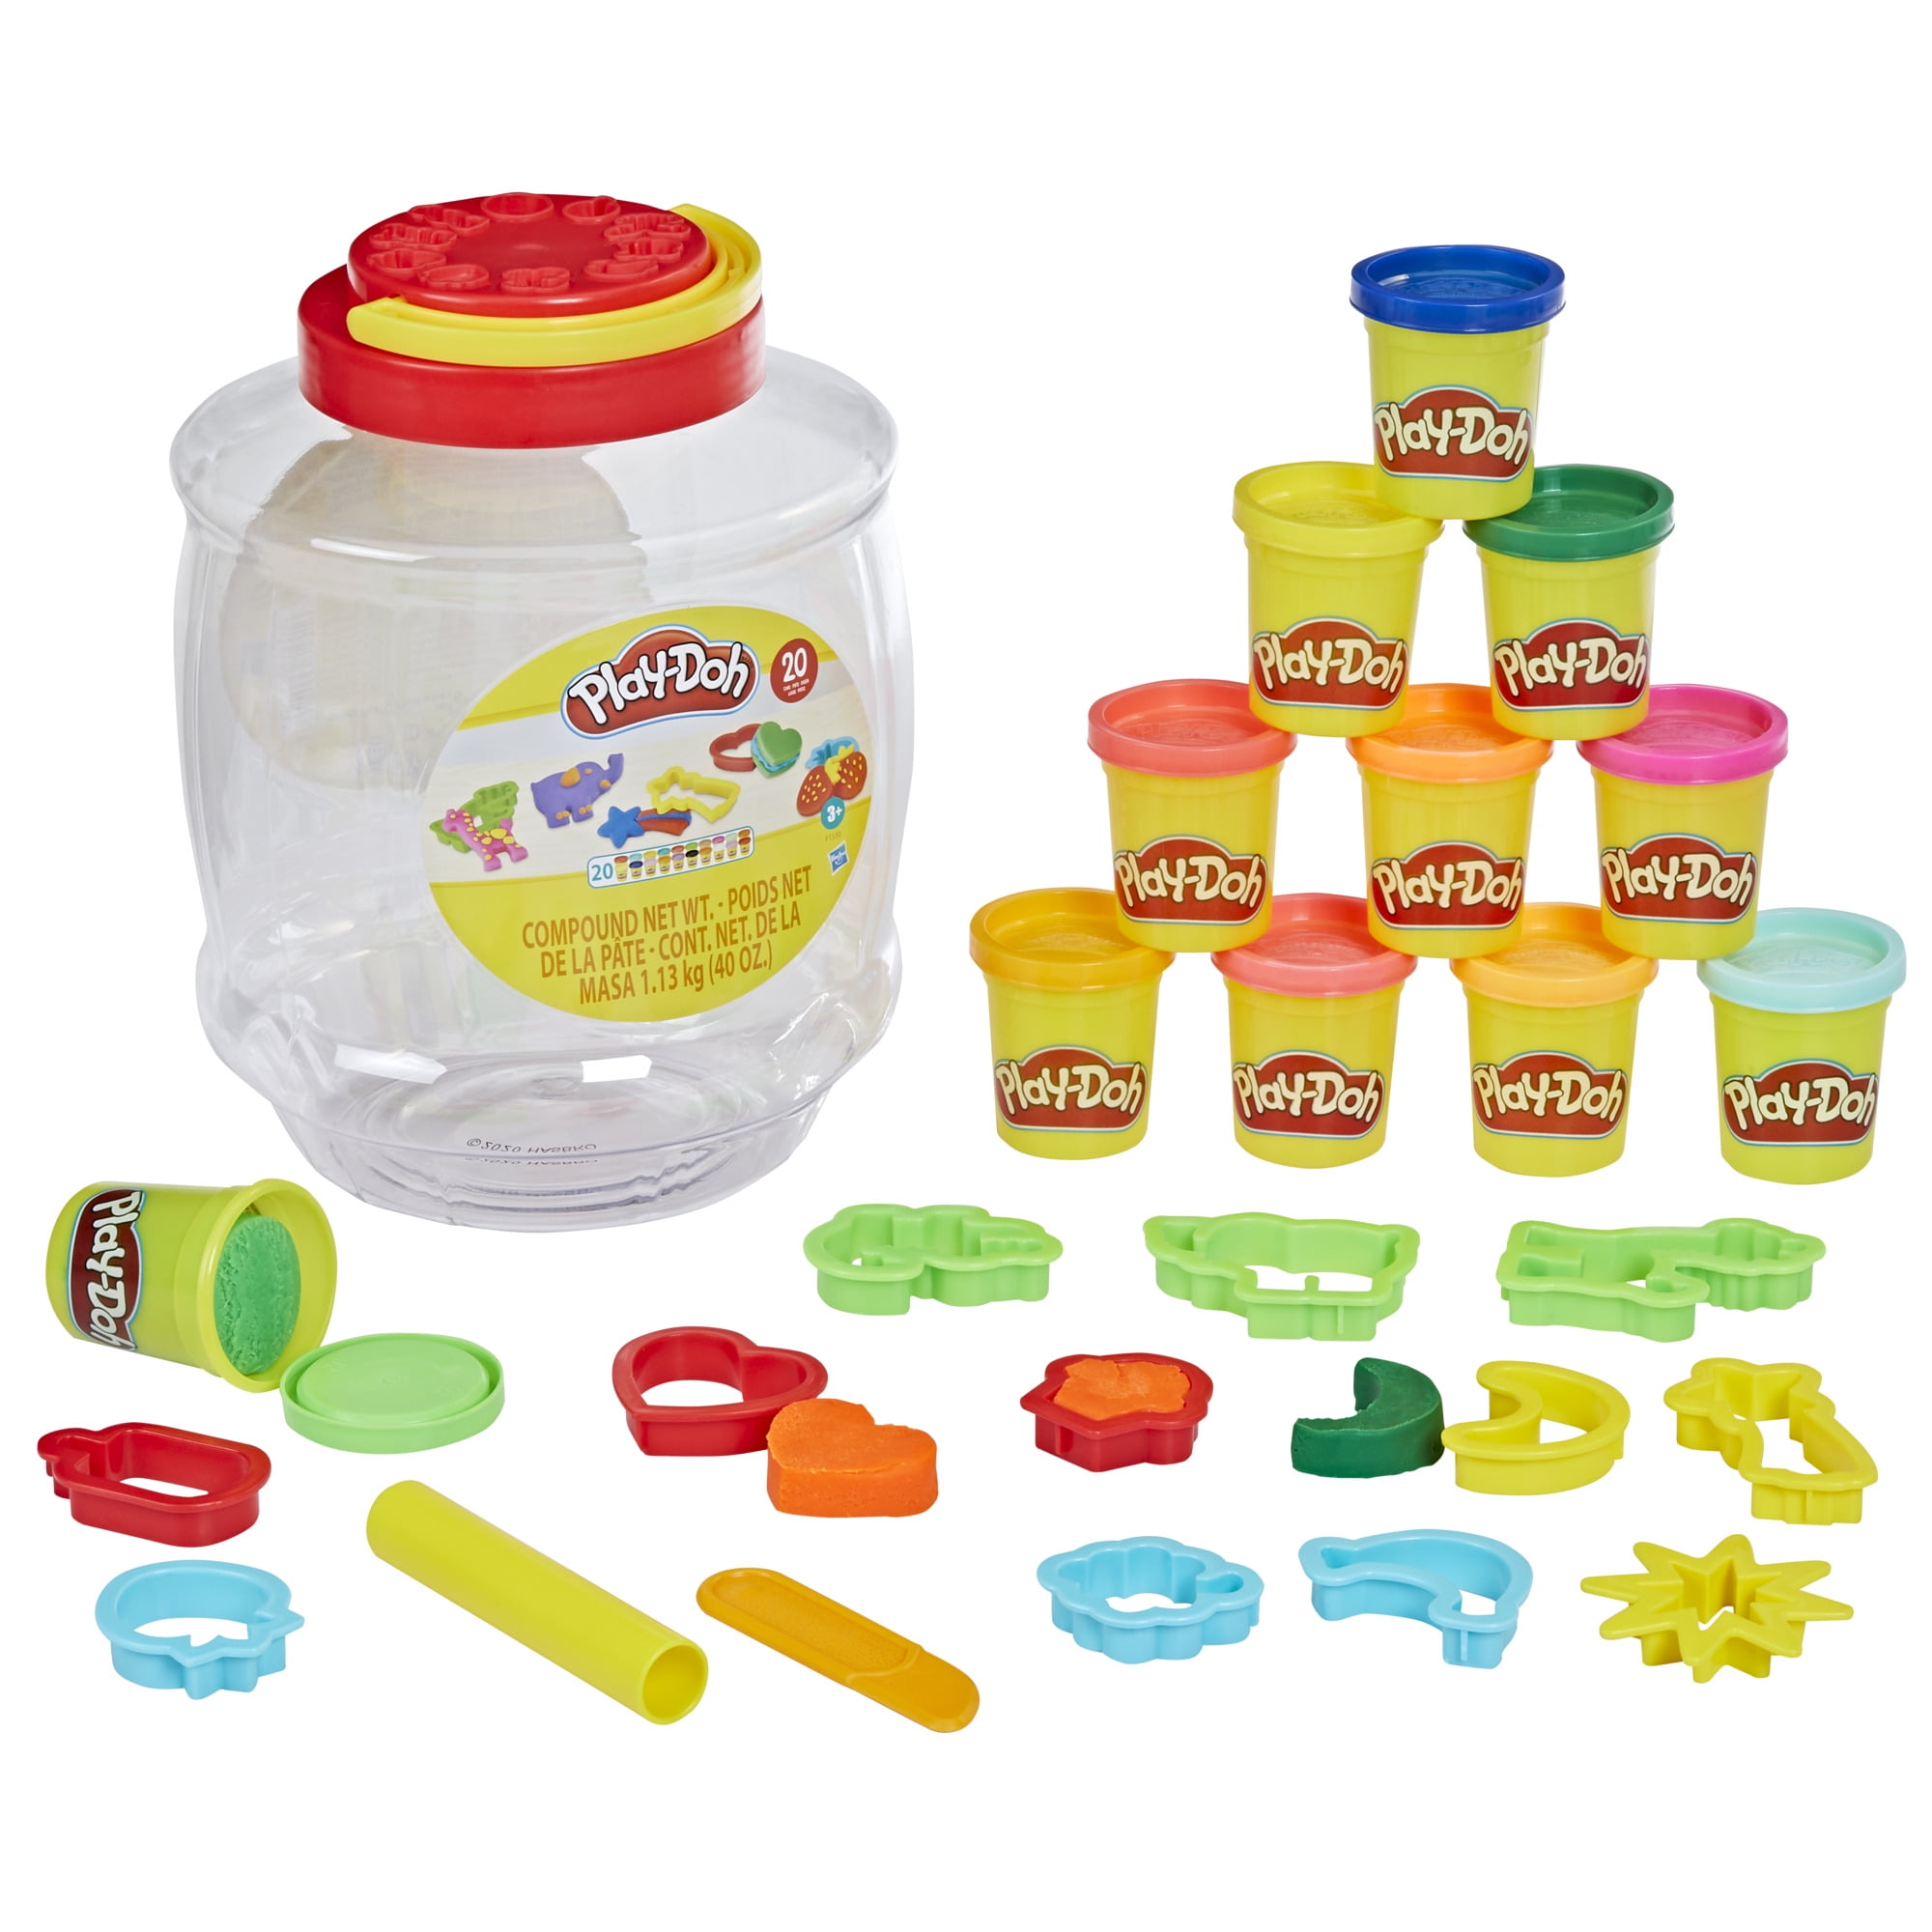 Play-Doh Bucket of Fun, 20 Cans of Dough and 14 Accessories, Back to School Supplies